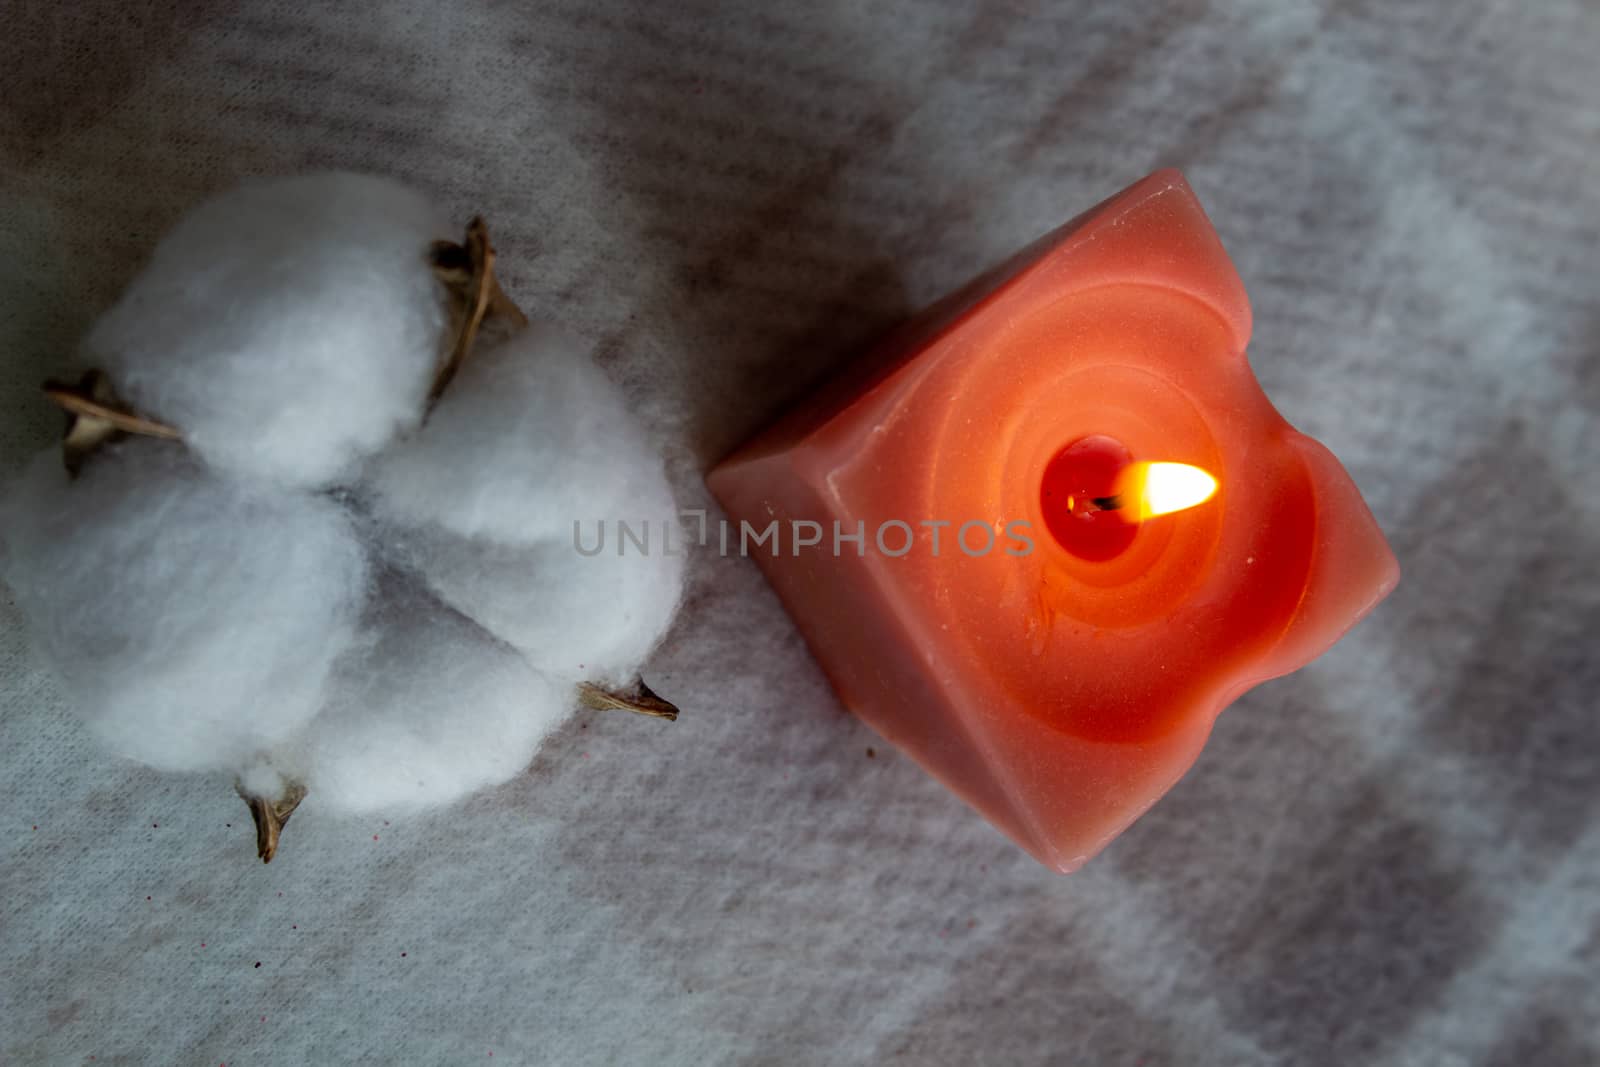 decoration, hygge and cosiness concept - burning wite fragrance candle and cotton flower on knitted blanket